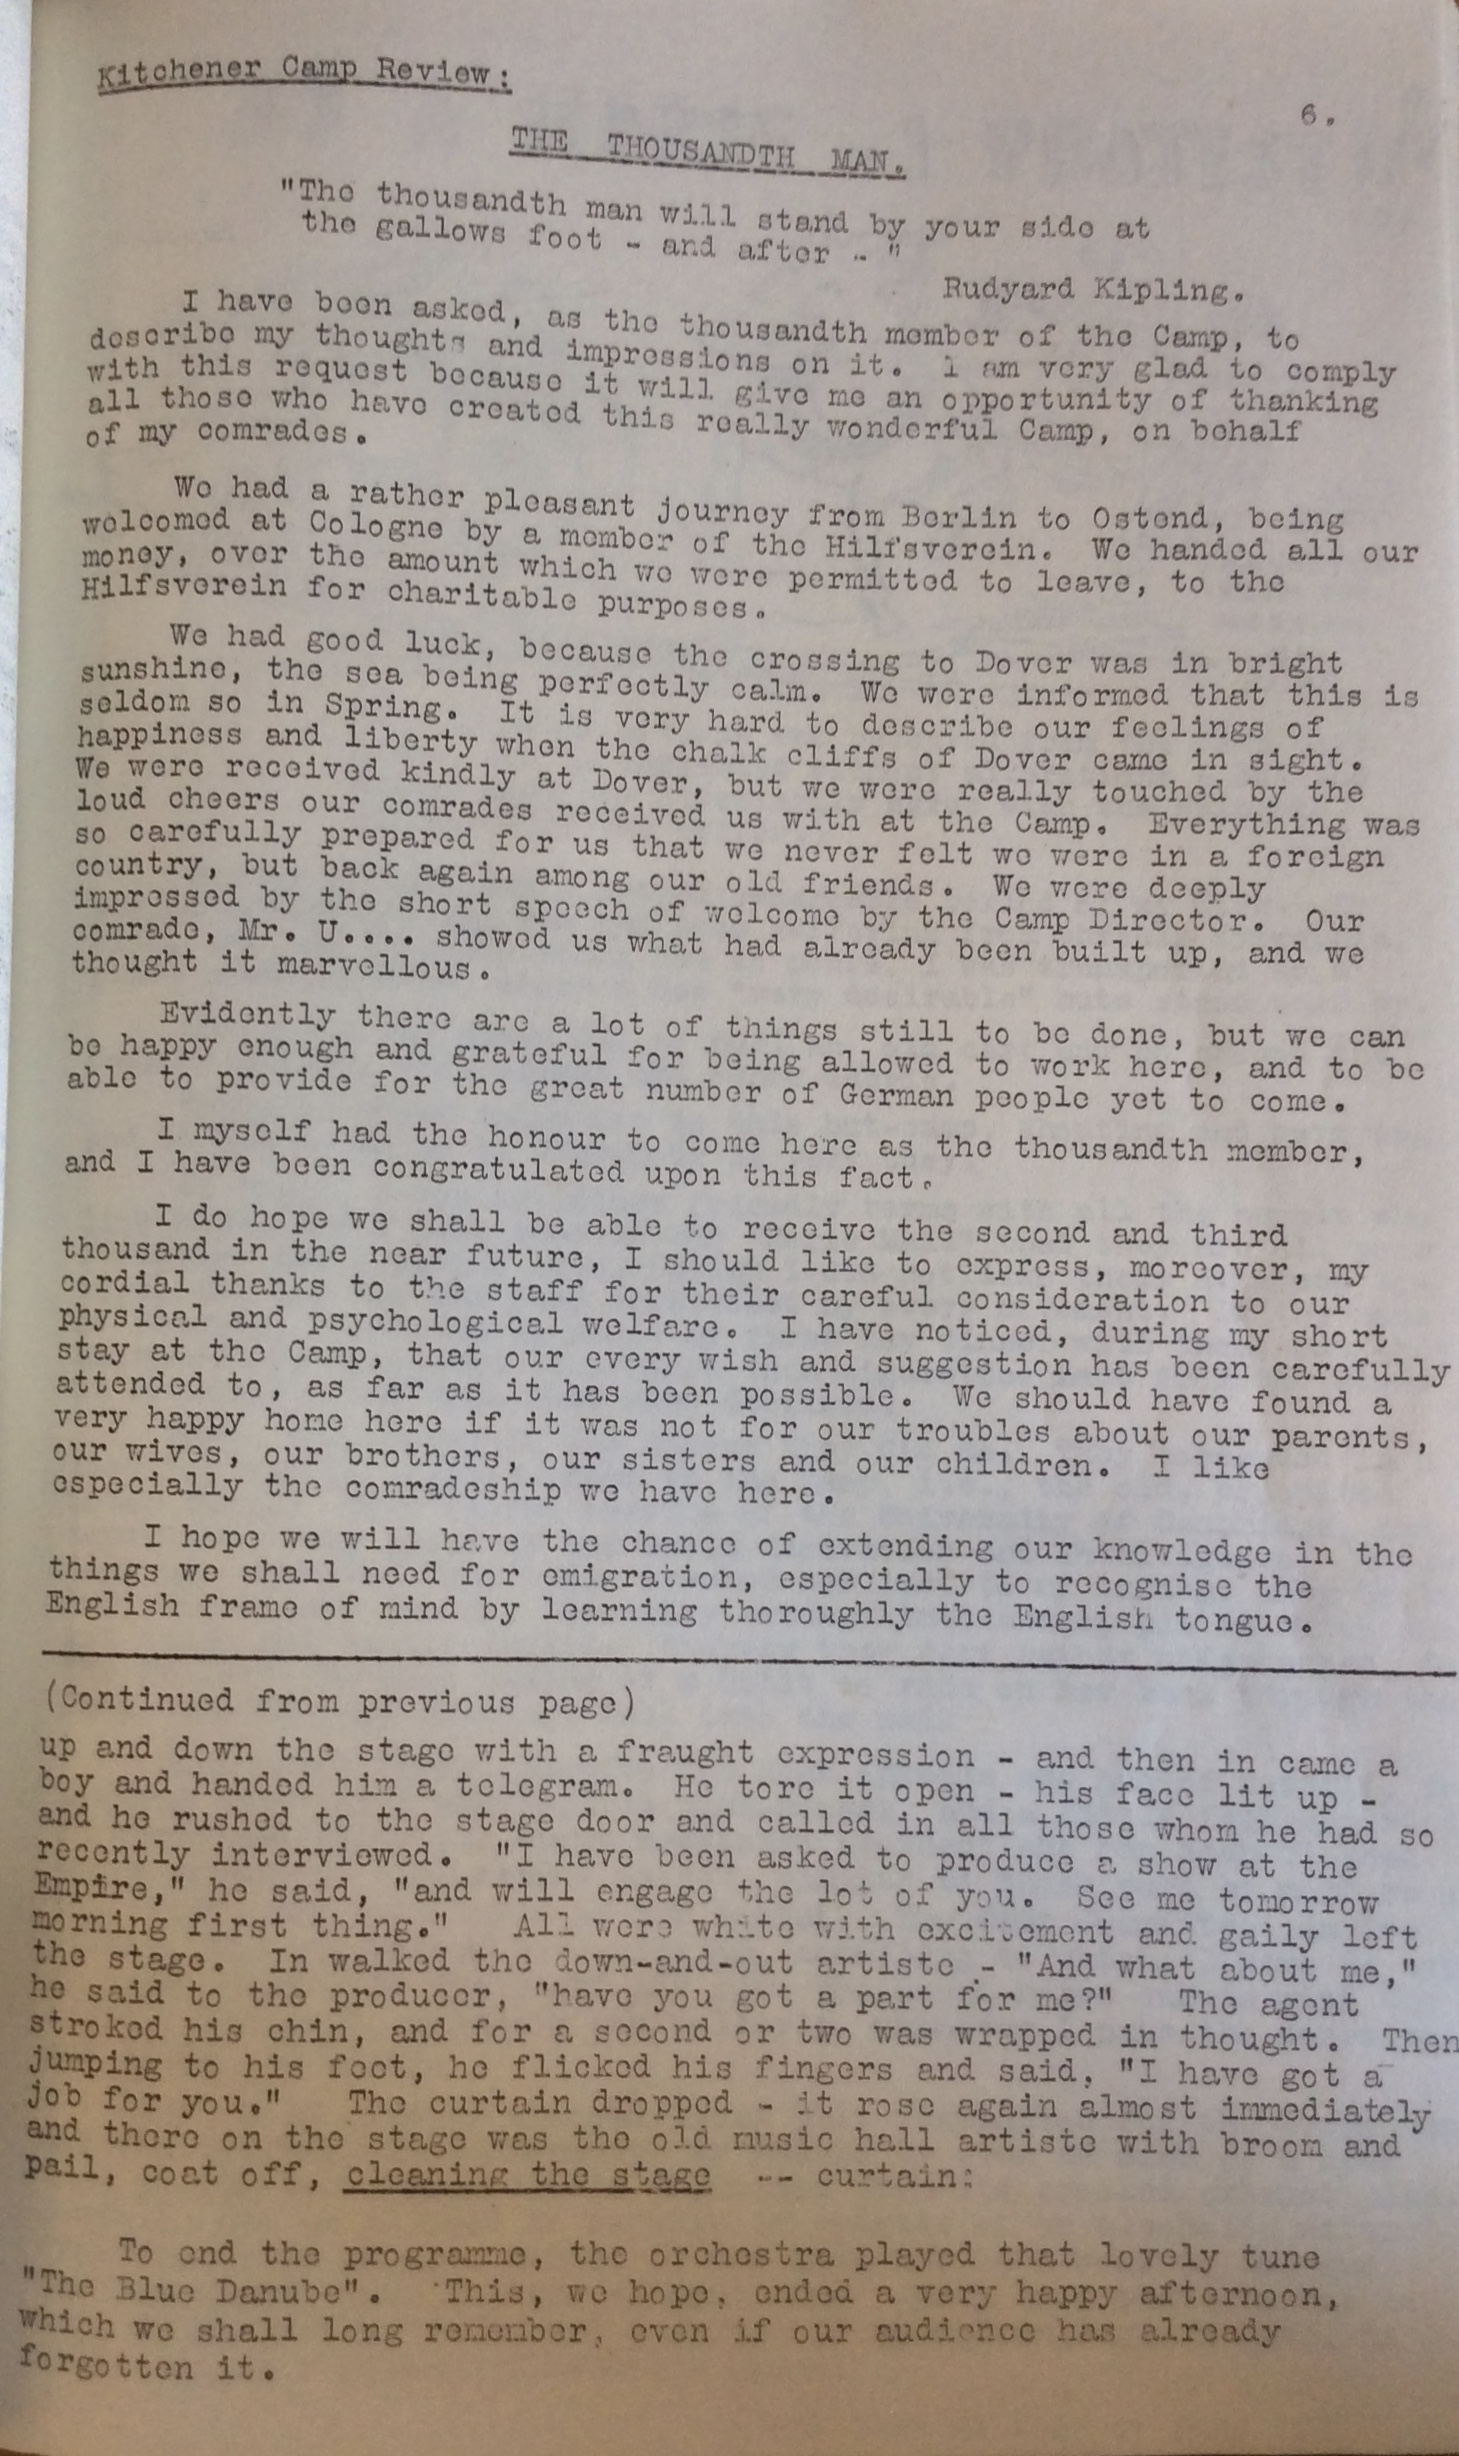 Kitchener Camp Review, June 1939, page 5